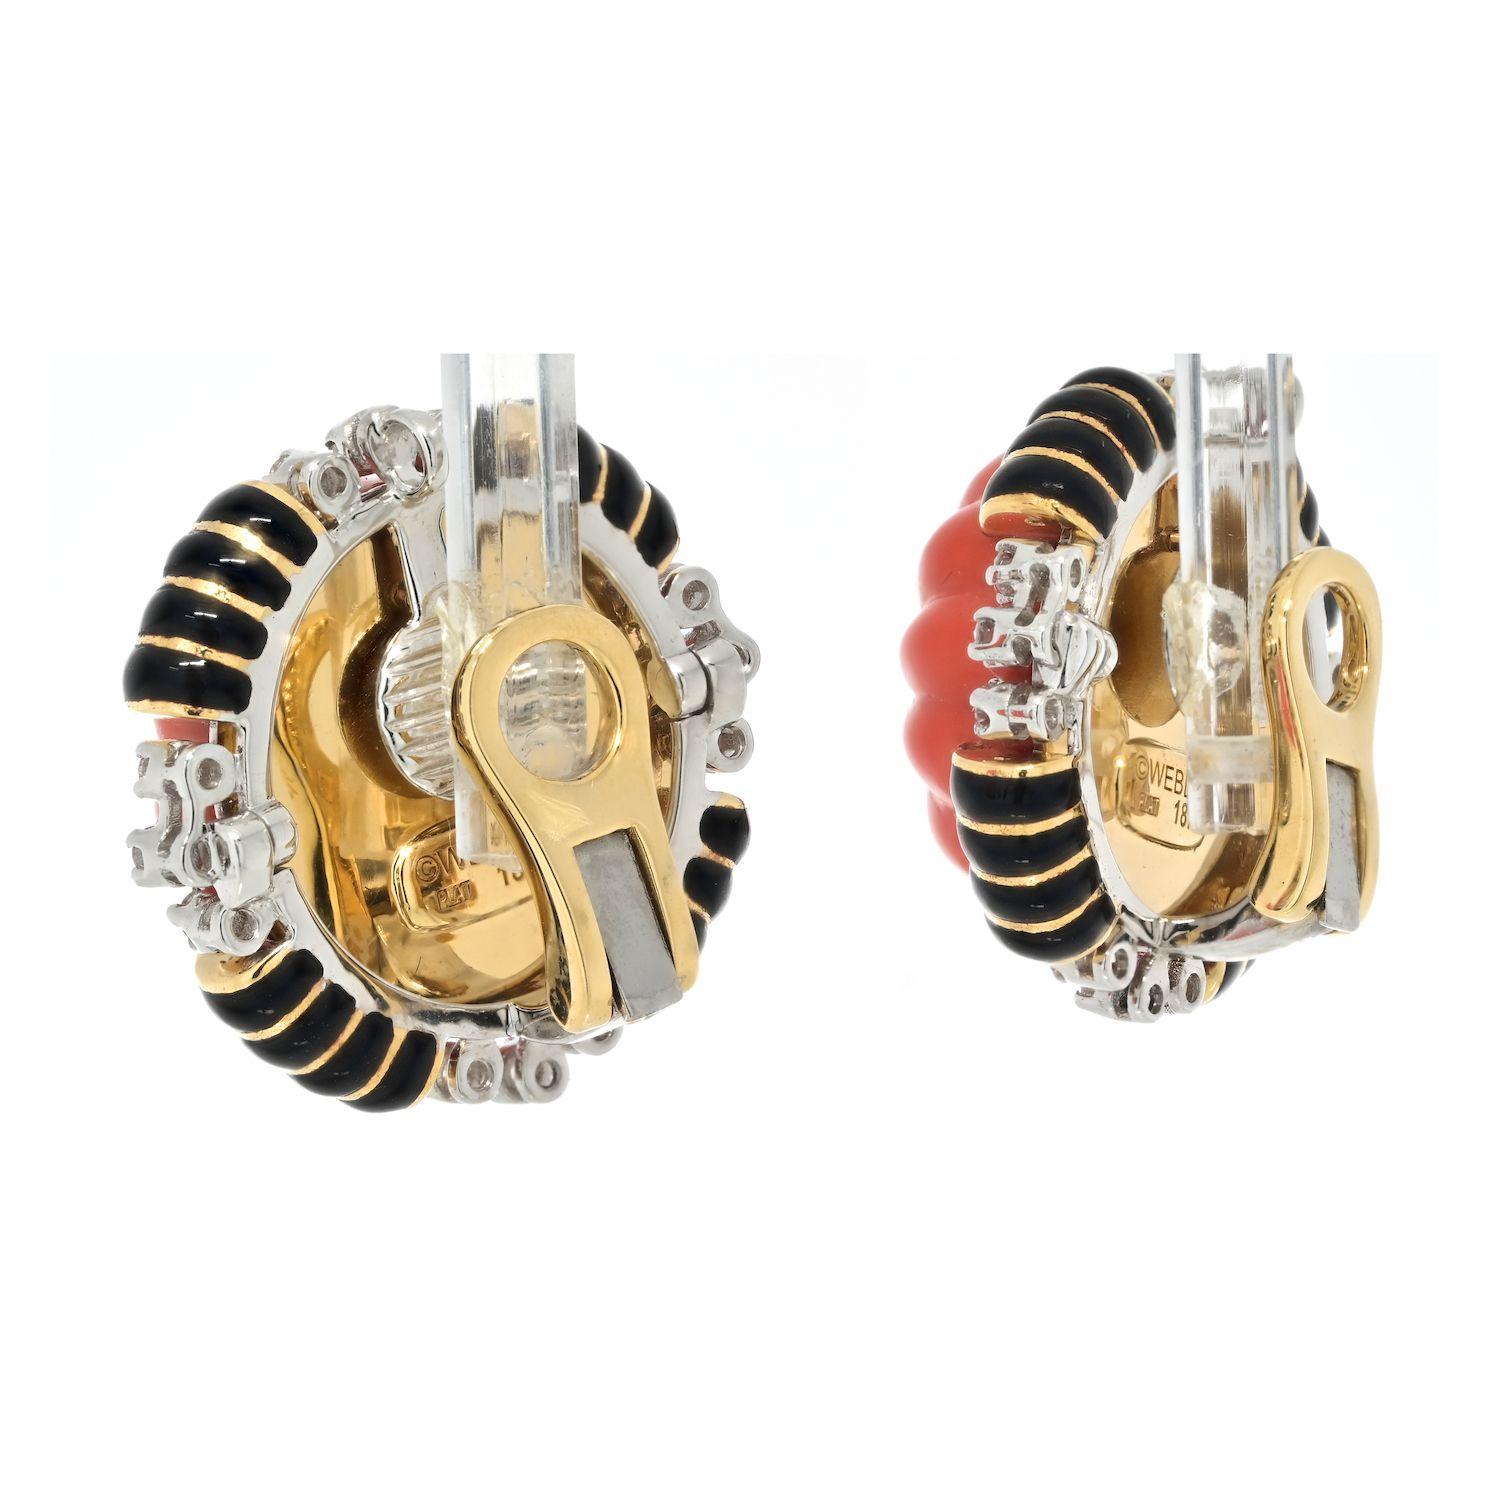 Capture the essence of elegance and sophistication with these exquisite David Webb Coral Platinum & 18K Yellow Gold Black Enamel and Diamond Earrings. Designed for the modern woman who appreciates fine craftsmanship and distinctive style, these